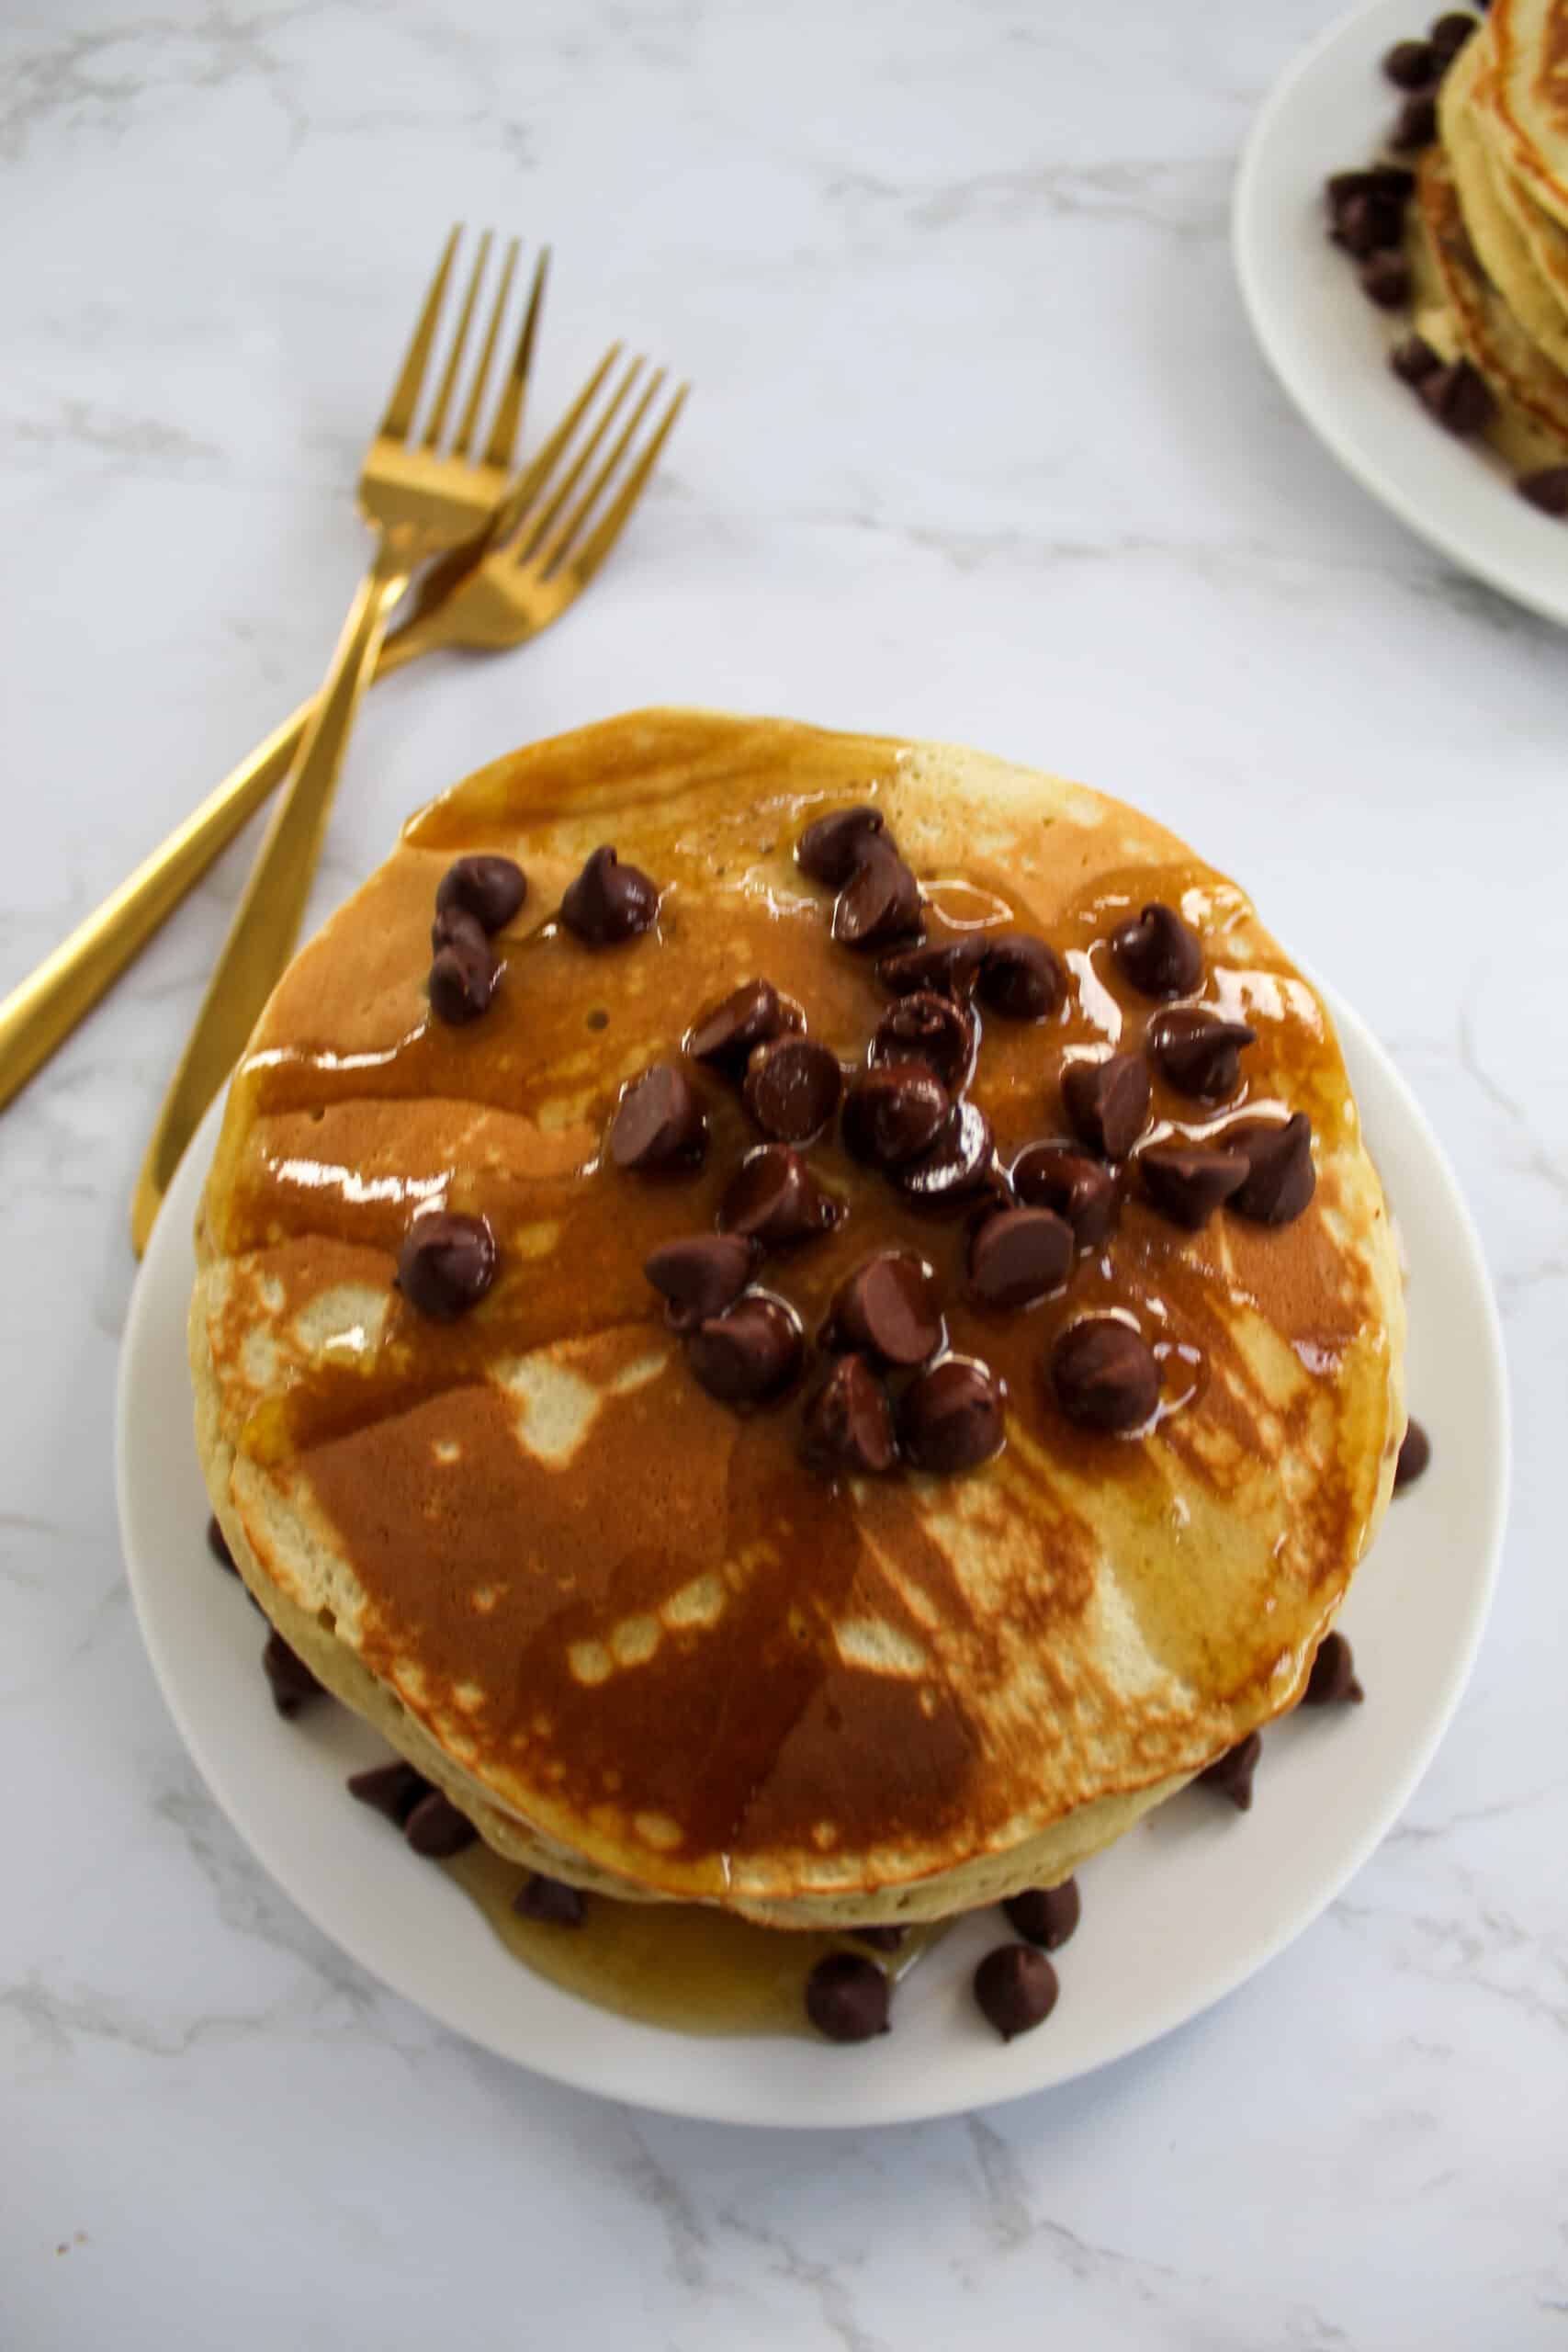 Fluffy Pancakes Without Baking Powder - Oh So Foodie